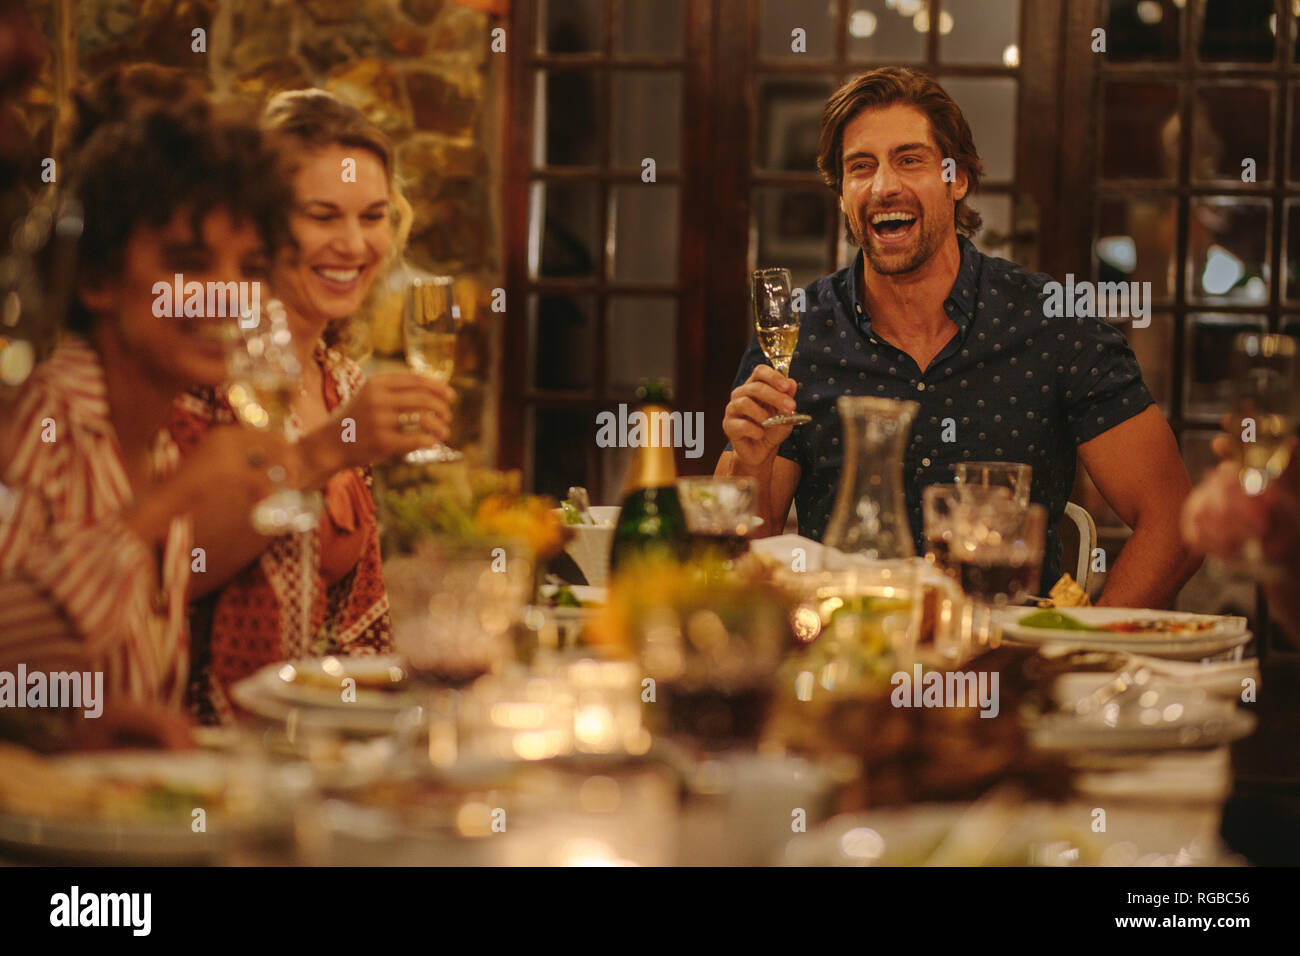 Cheerful young people having drinks at dinner party. Group of friends sitting around a table enjoying dinner party with drinks. Stock Photo